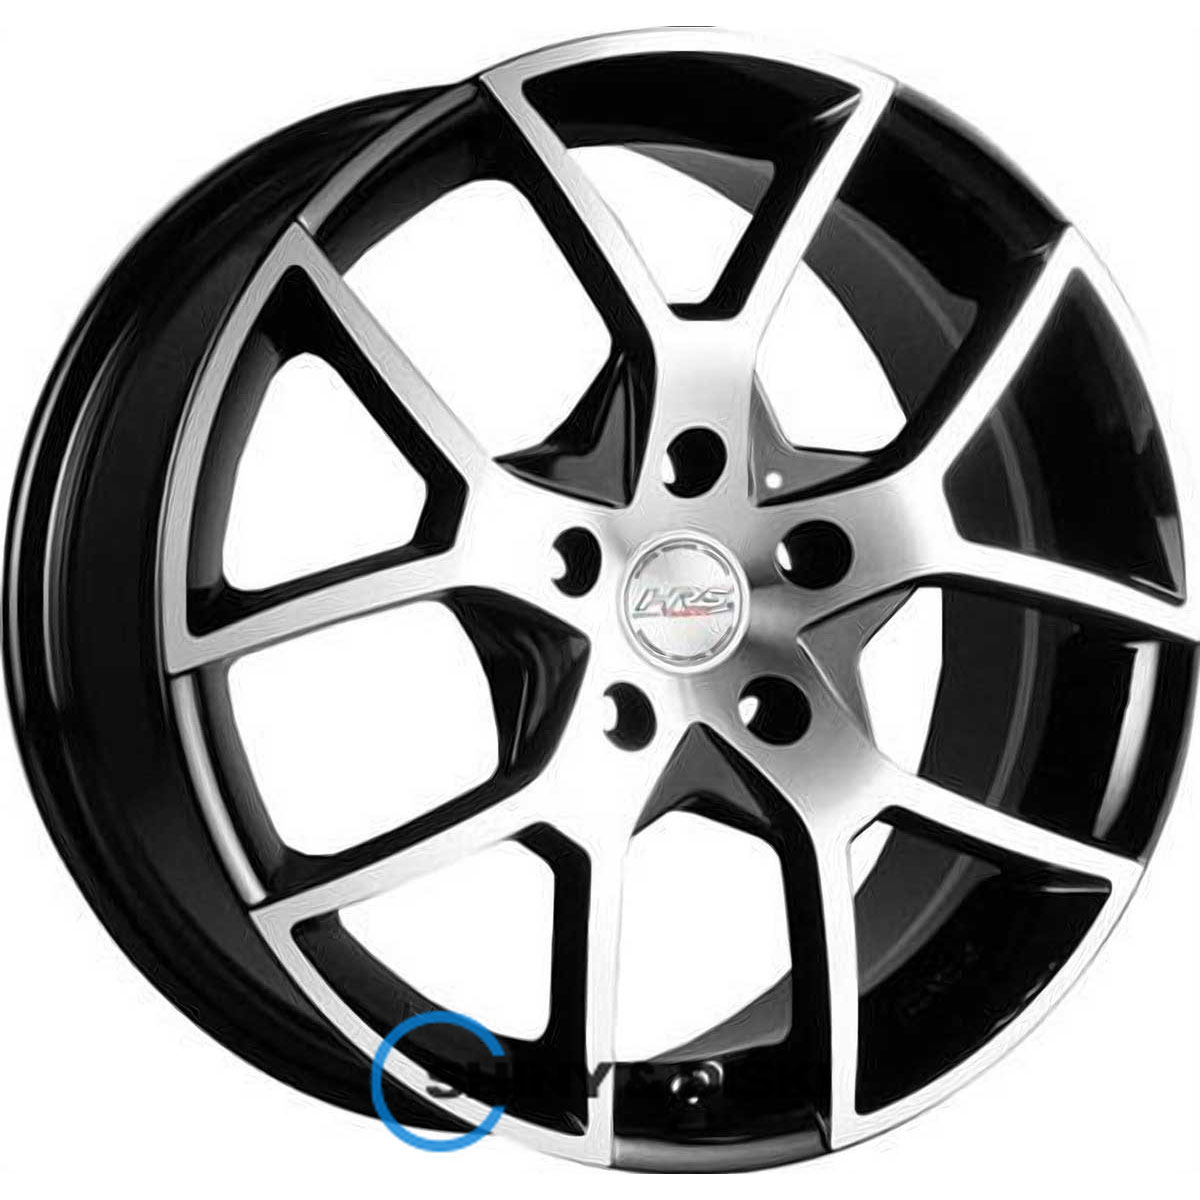 rs tuning h-466 bkfp r15 w6.5 pcd5x100 et40 dia67.1